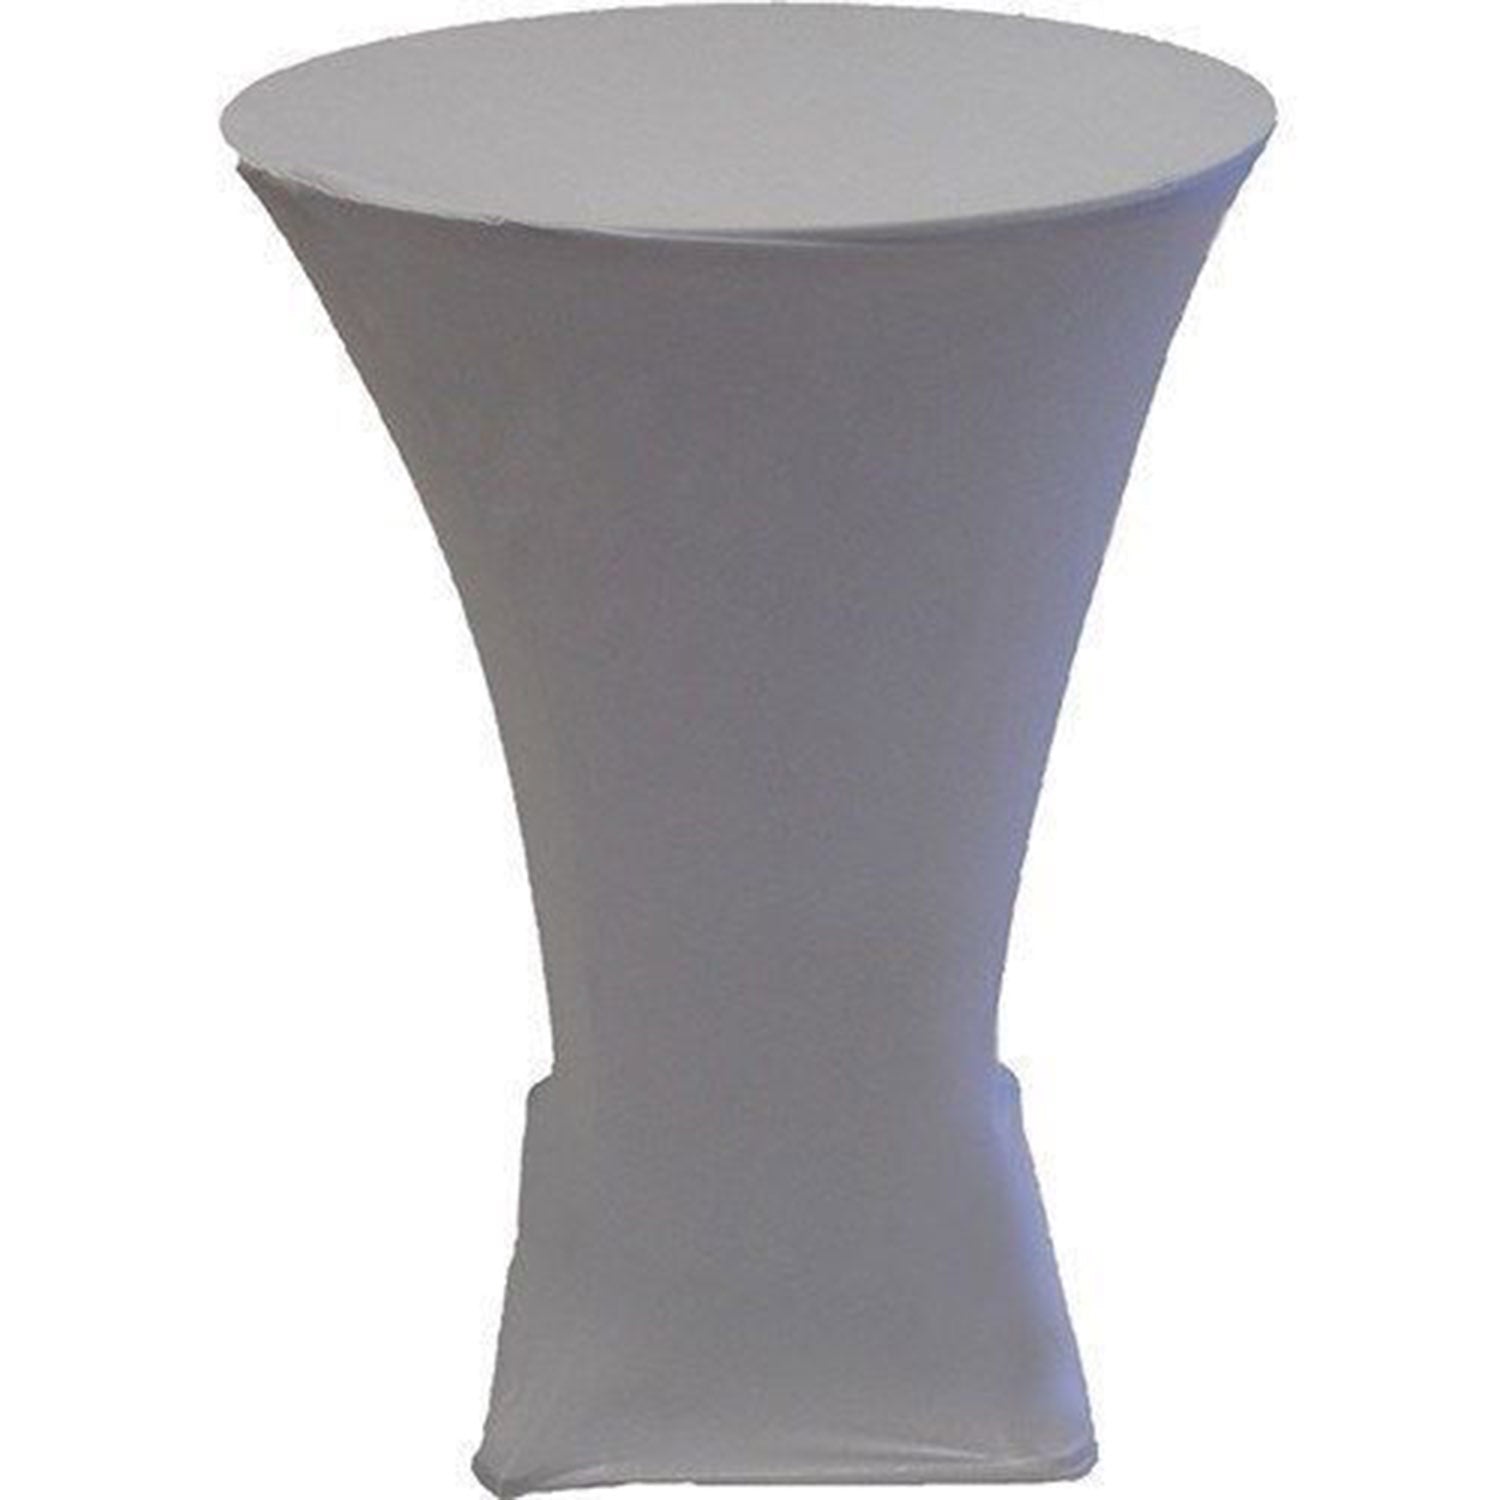 REPLACEMENT SCRIM Scrim King SS-CTB01W Scrim Cover for Cocktail Cruiser Table - White Scrim King